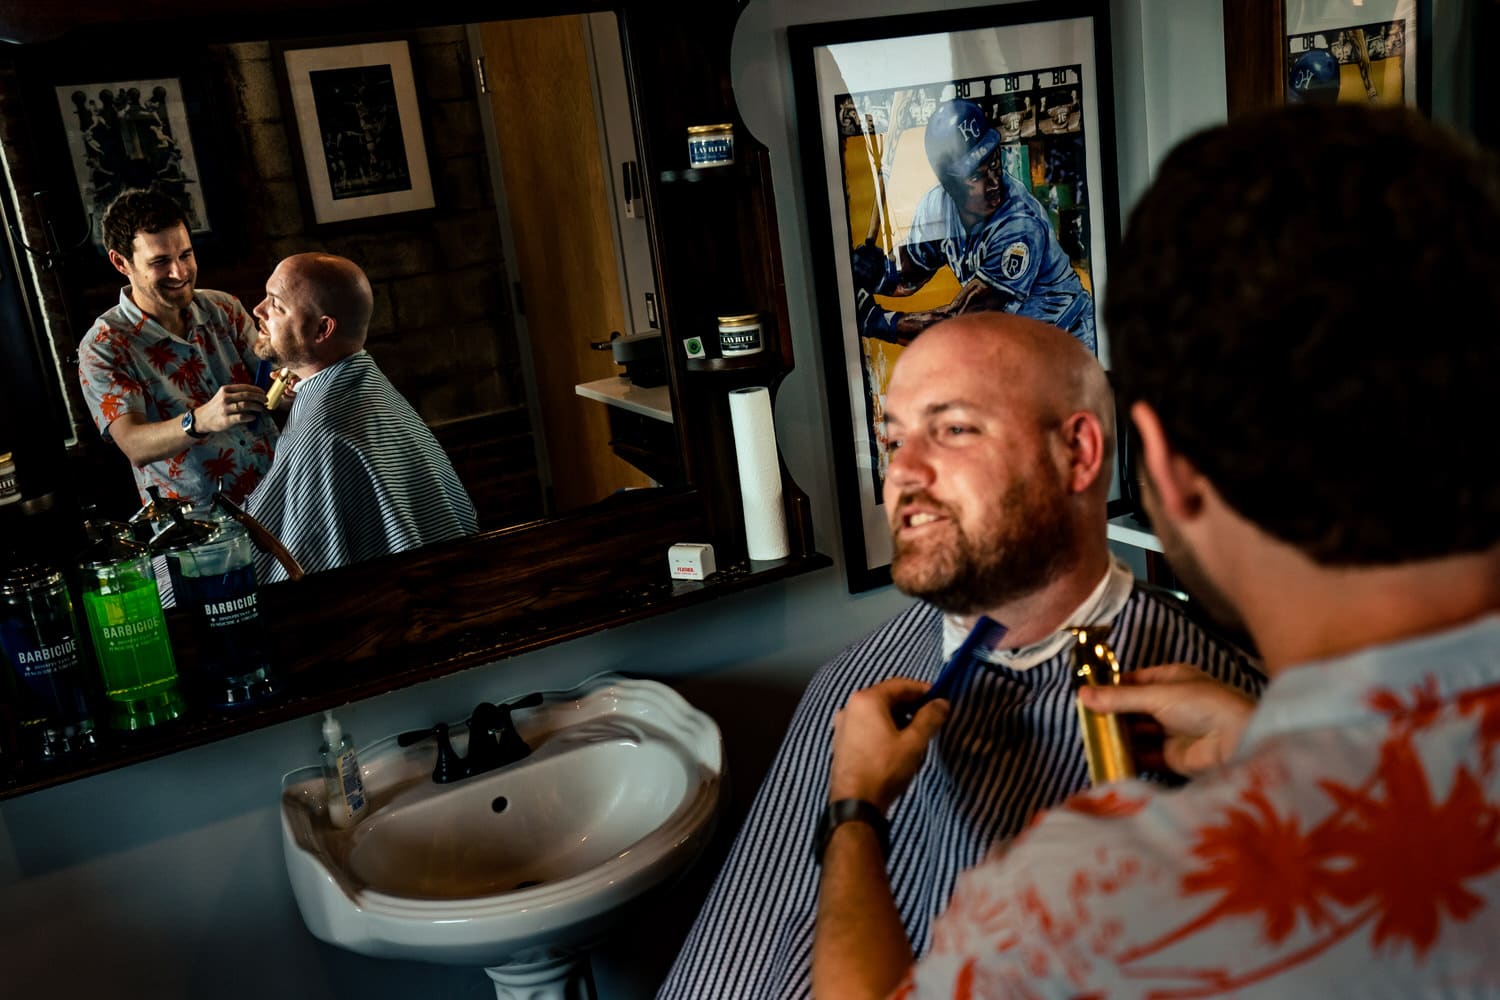 A candid, colorful picture of a man getting his beard trimmed, his reflection visible in the mirror behind him on the morning of his summer wedding day in Kansas City. 